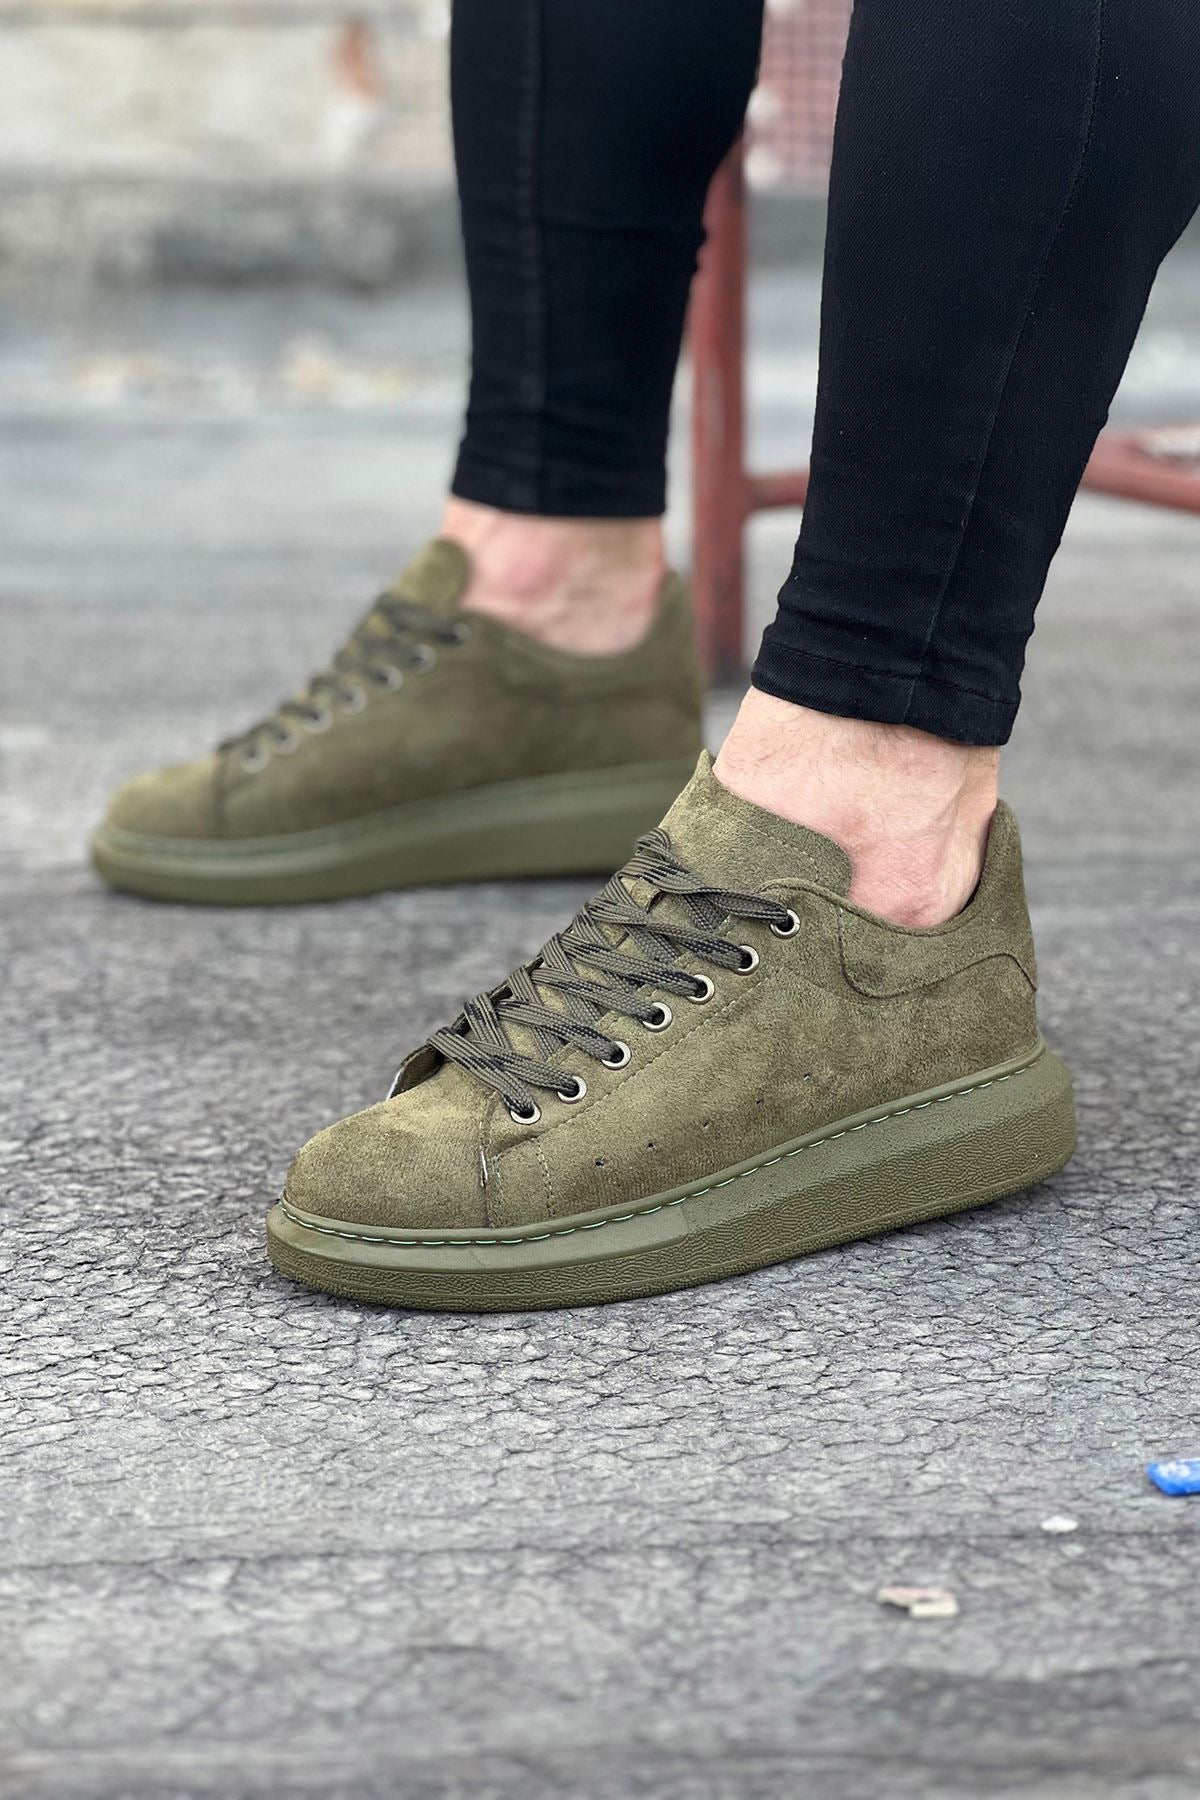 WG096 Khaki Suede Daily Men's Casual Shoes - STREETMODE™